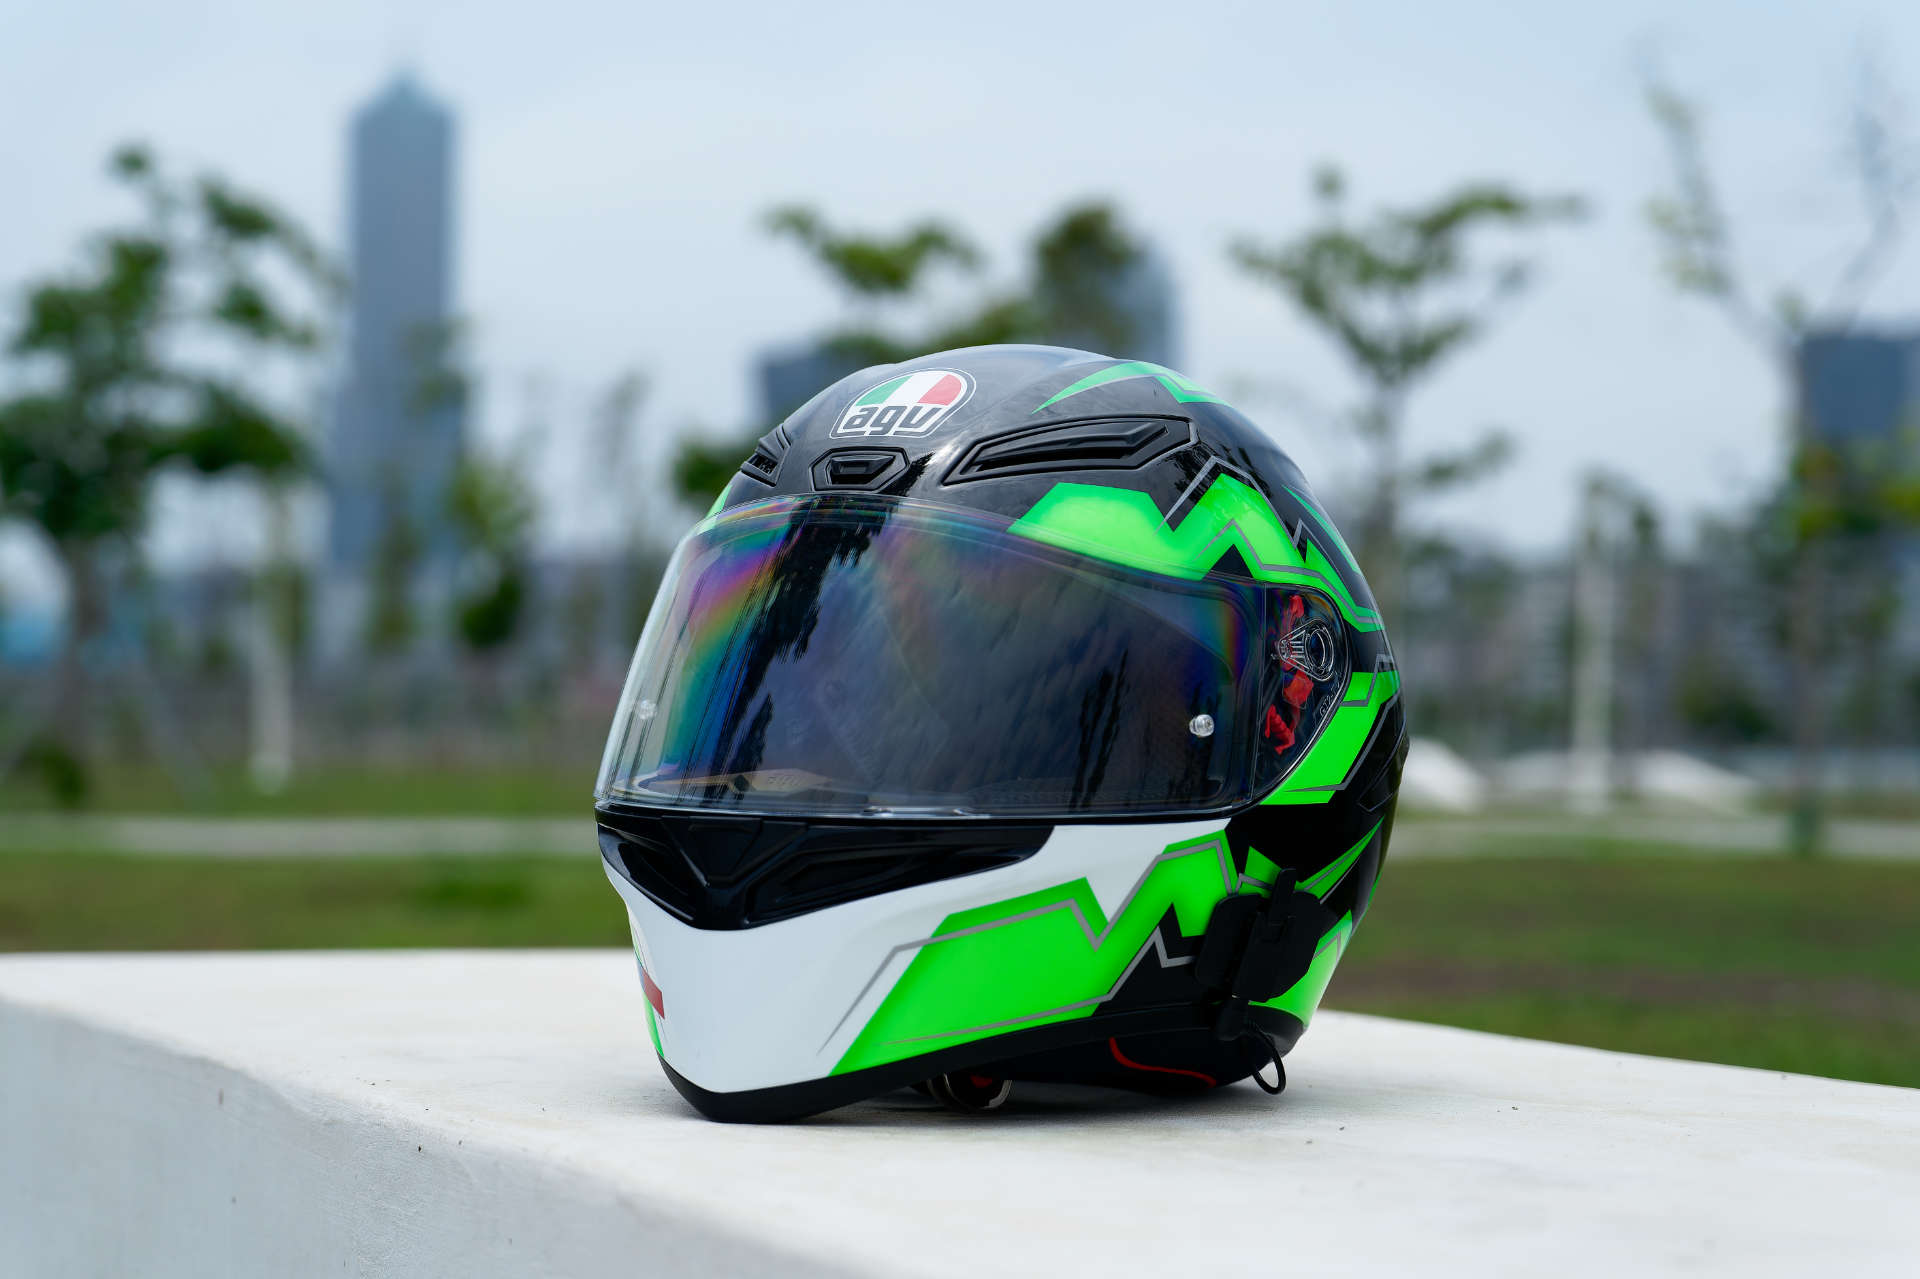 An AGV K1 S full-face motorcycle helmet photographed on a concrete park bench.